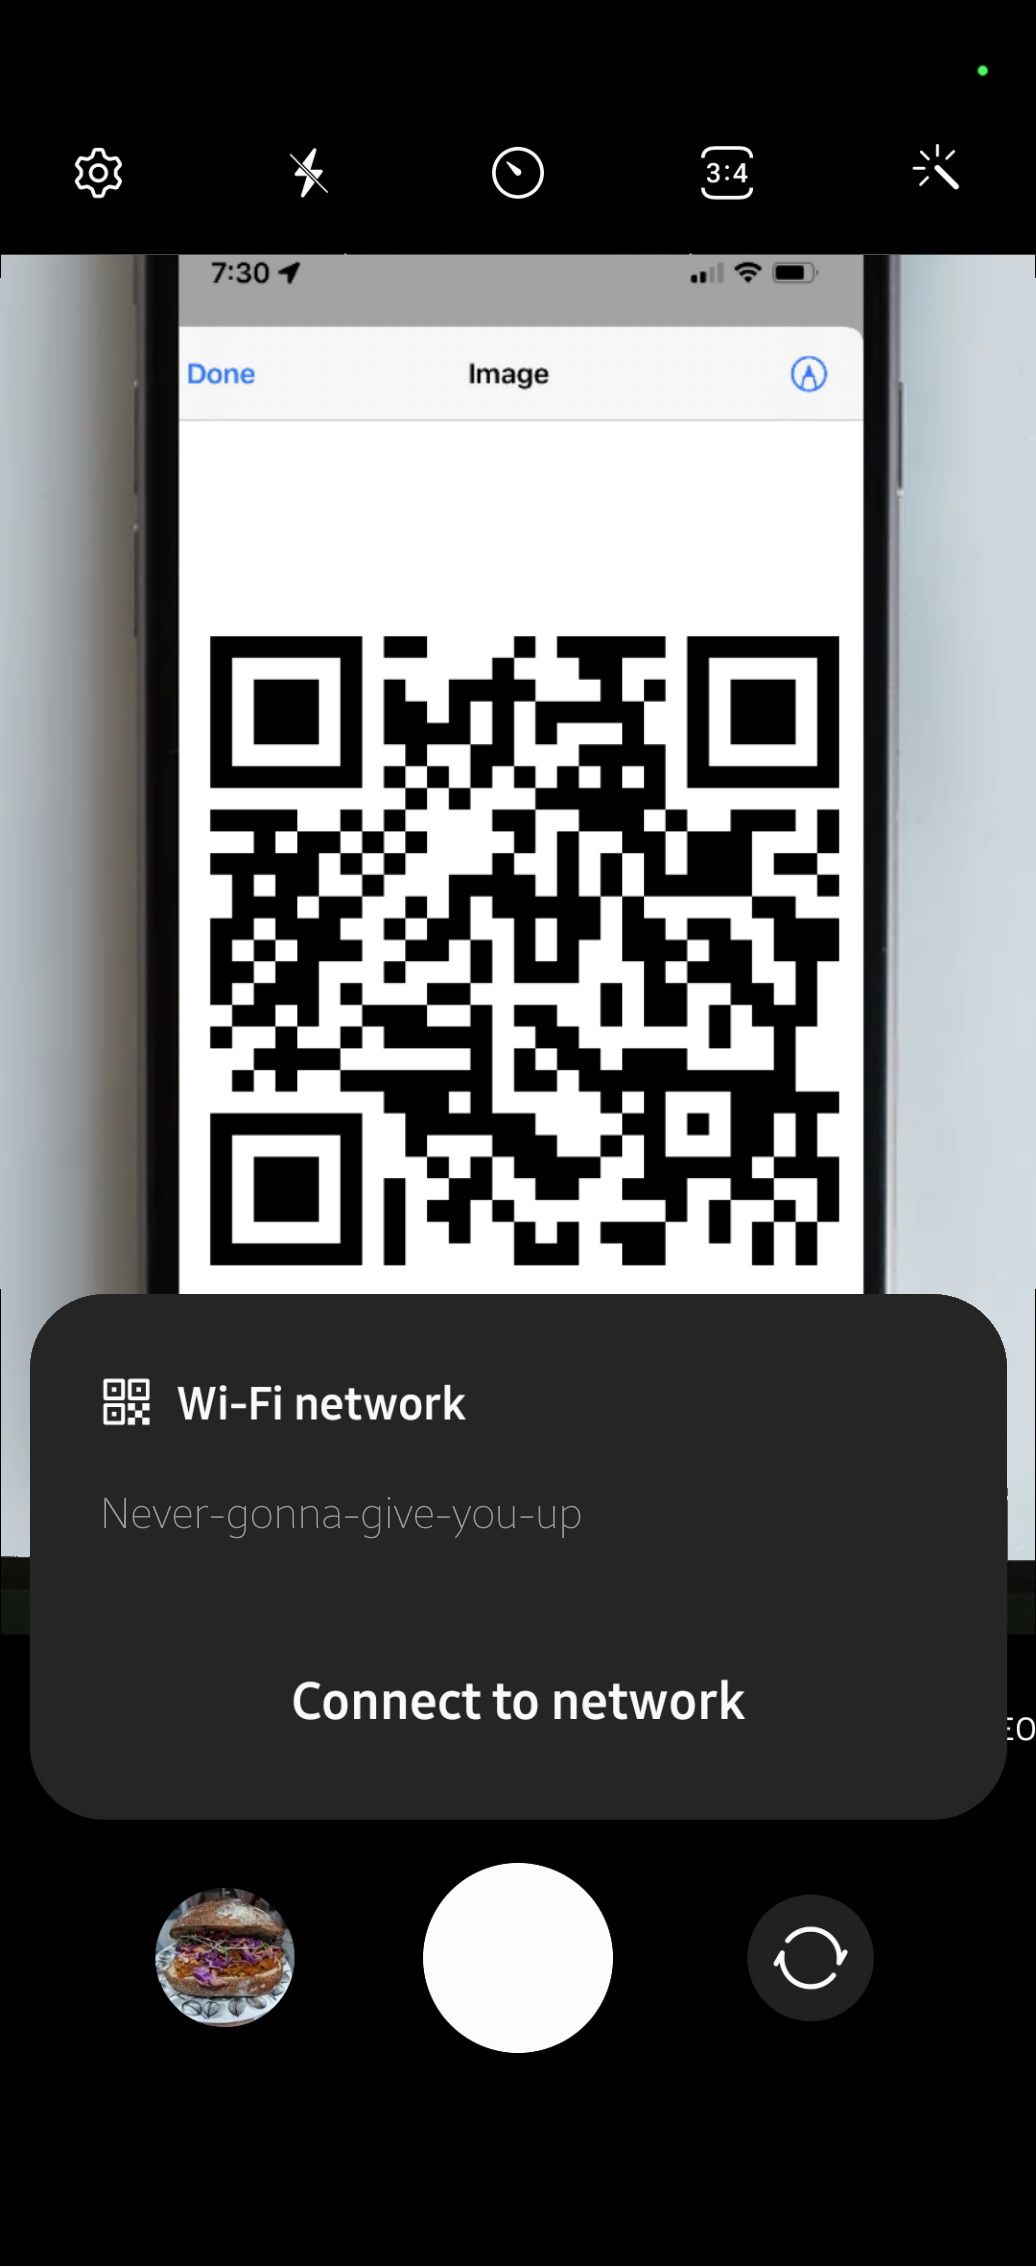 samsung camera app with a qr code in the viewfinder and the popup prompting you to connect to the network